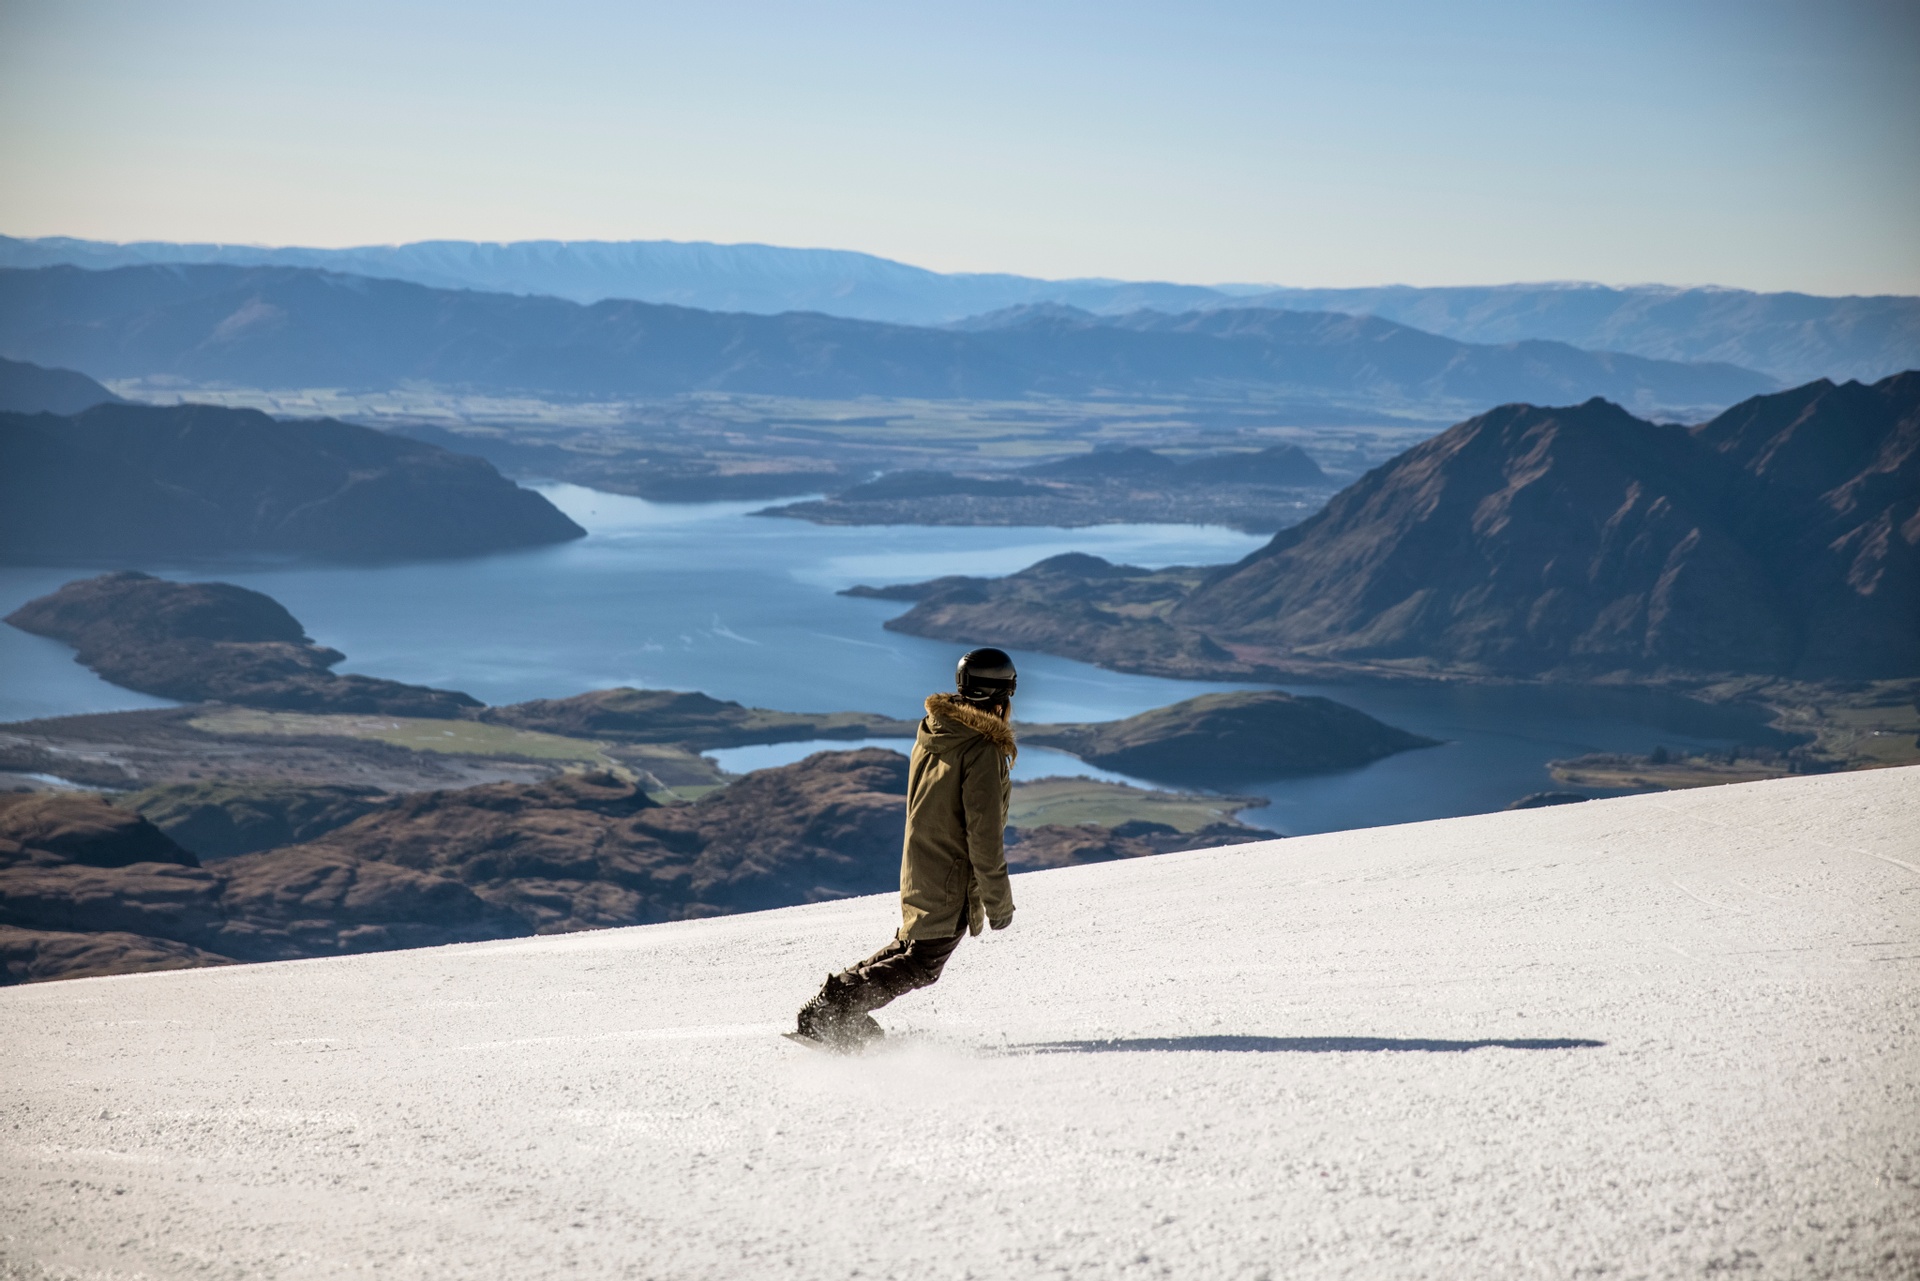 High above Wanaka at Treble Cone. Pic courtesy Miles Holden and TNZ.